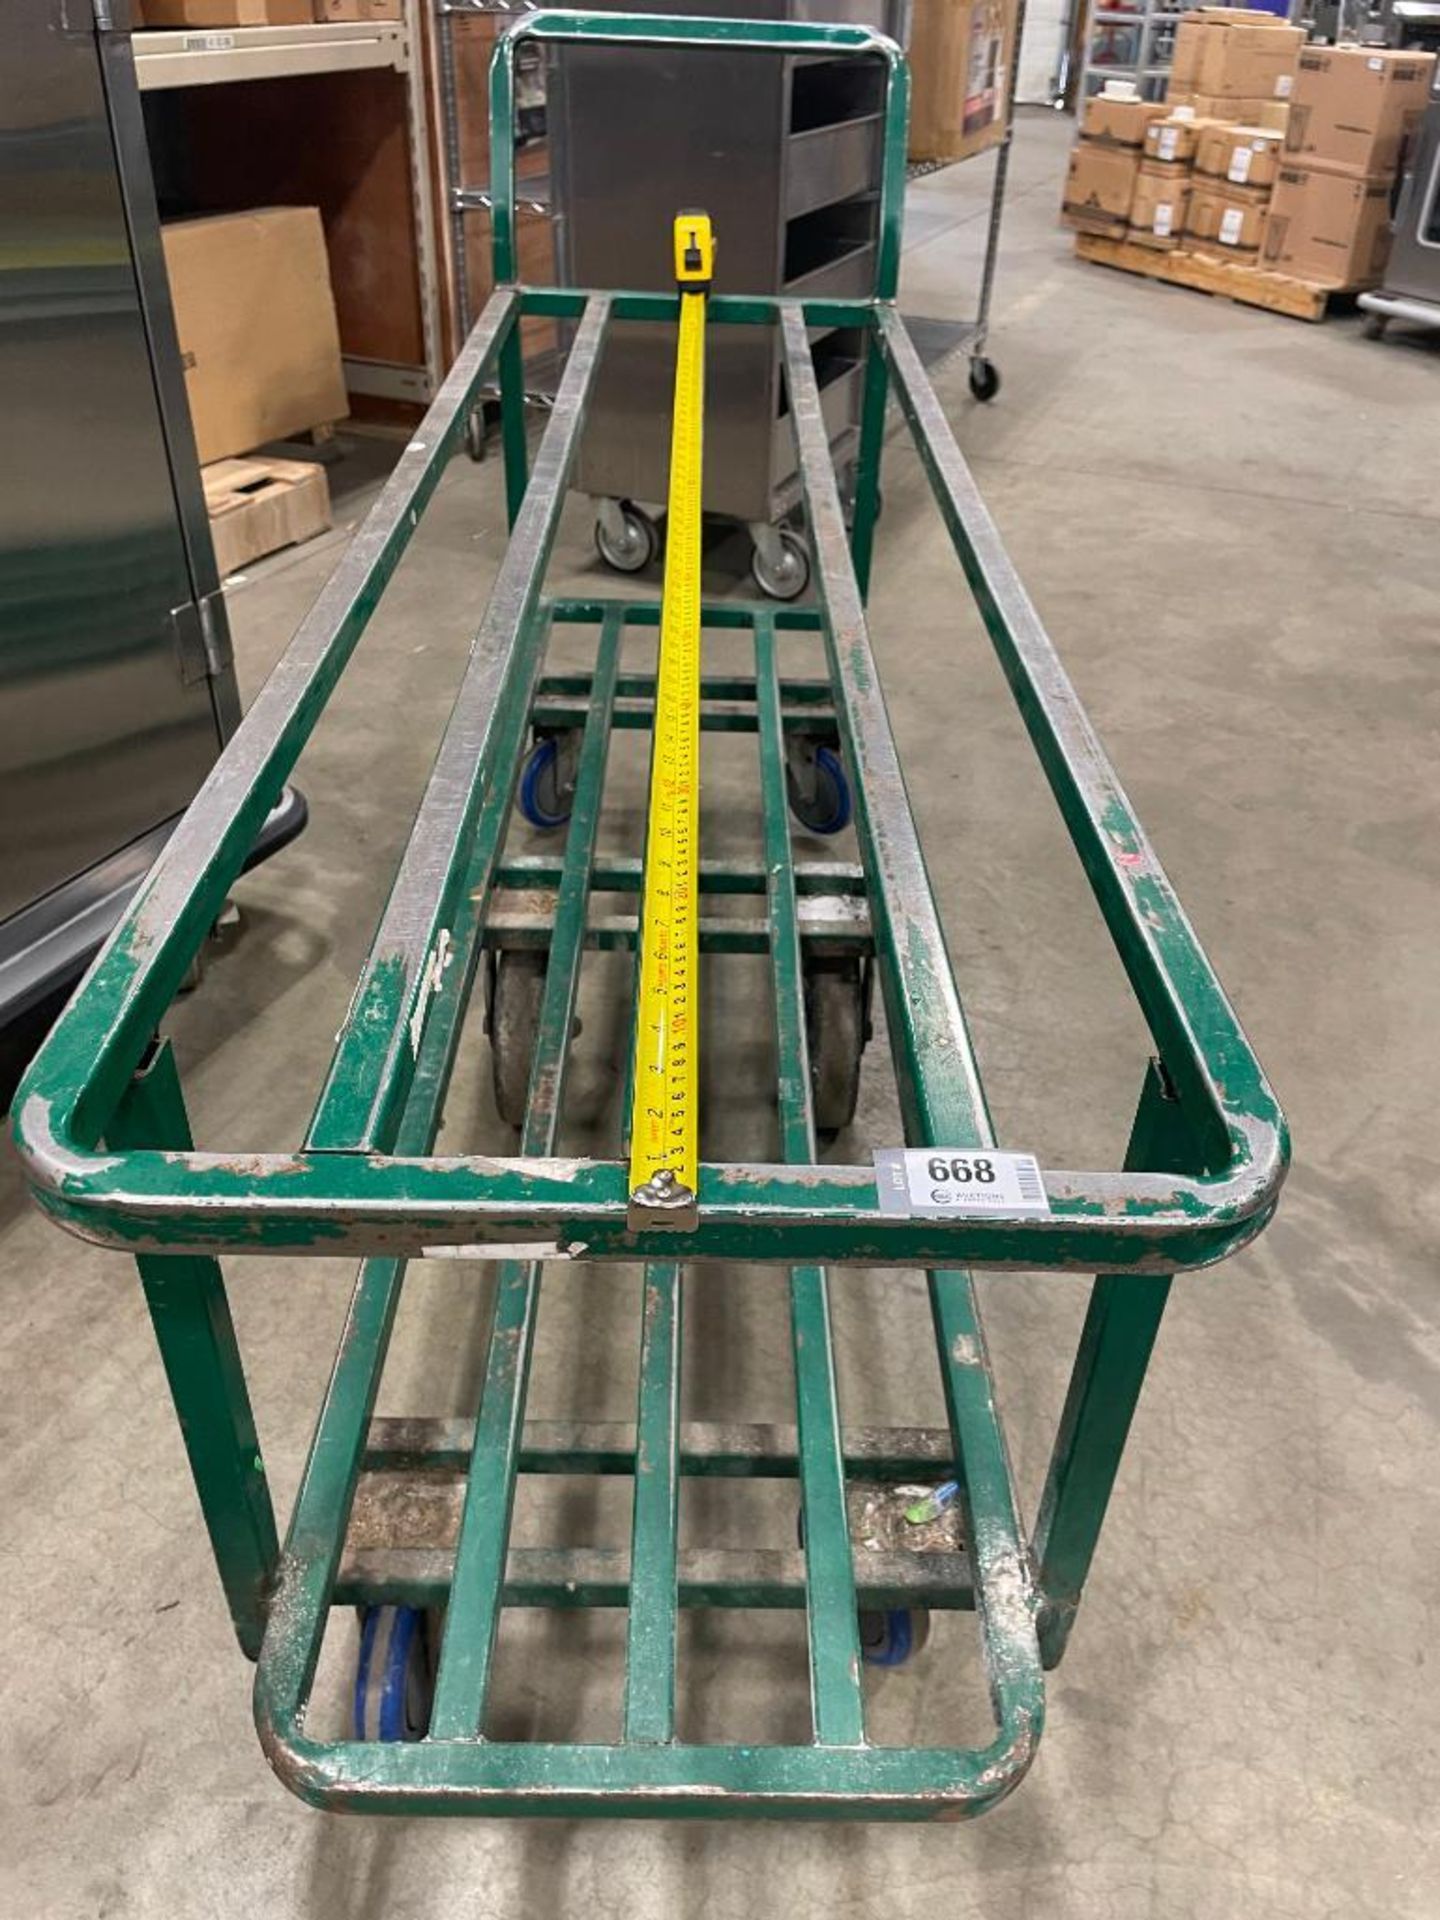 2 TIER GREEN STEEL WAREHOUSE STOCKING CART - Image 4 of 4